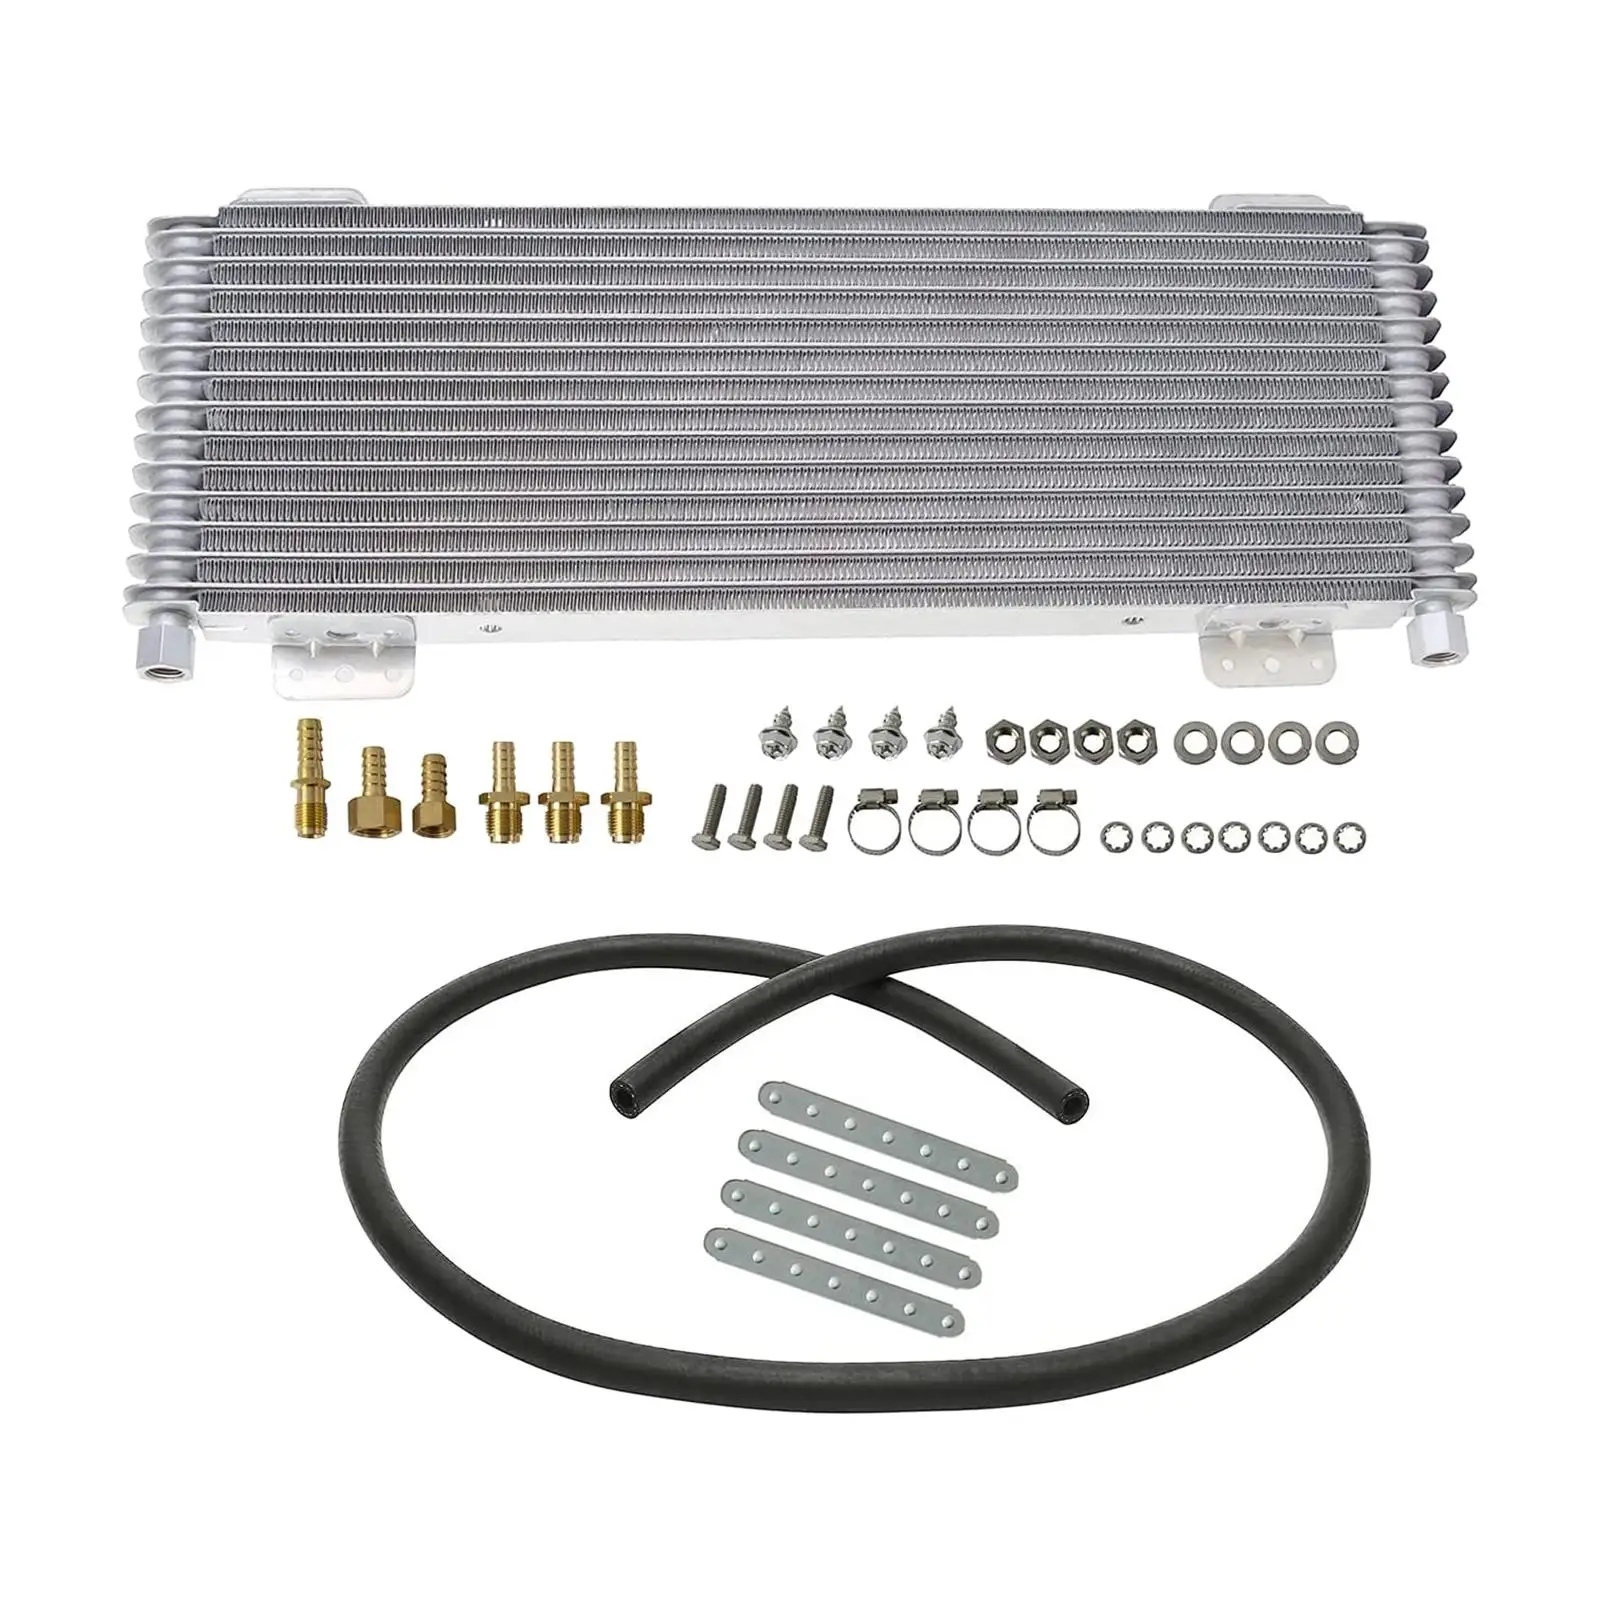 Transmission Oil Cooler Low Pressure Drop LPD47391 Towing Applications Replacement  Easy to Install